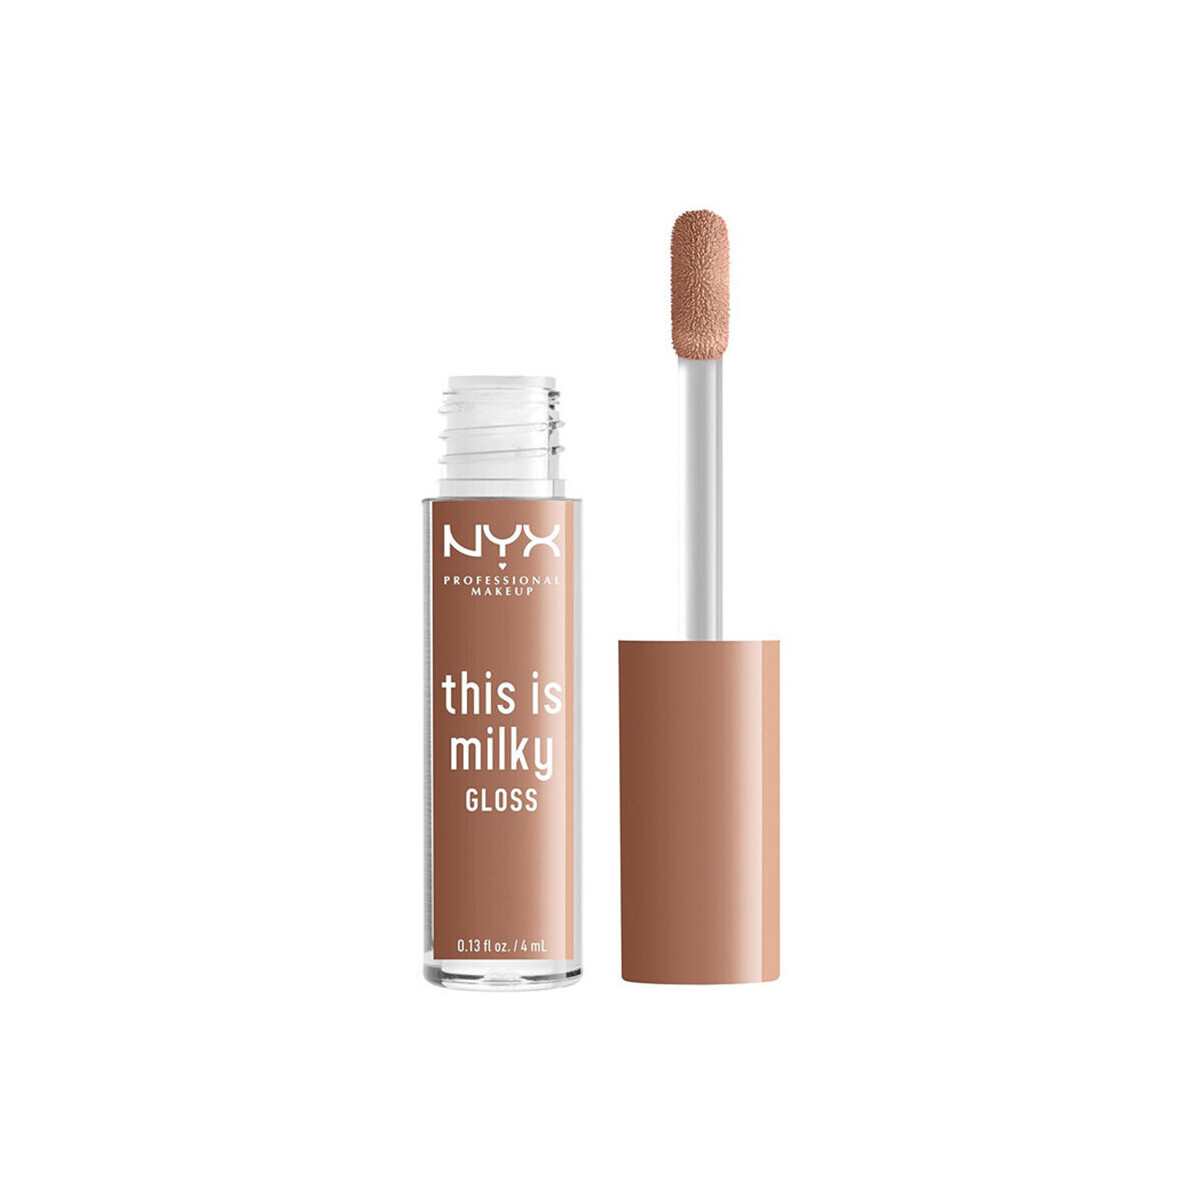 Beauty Damen Gloss Nyx Professional Make Up Gloss This Is Milky Limited Edition Beige